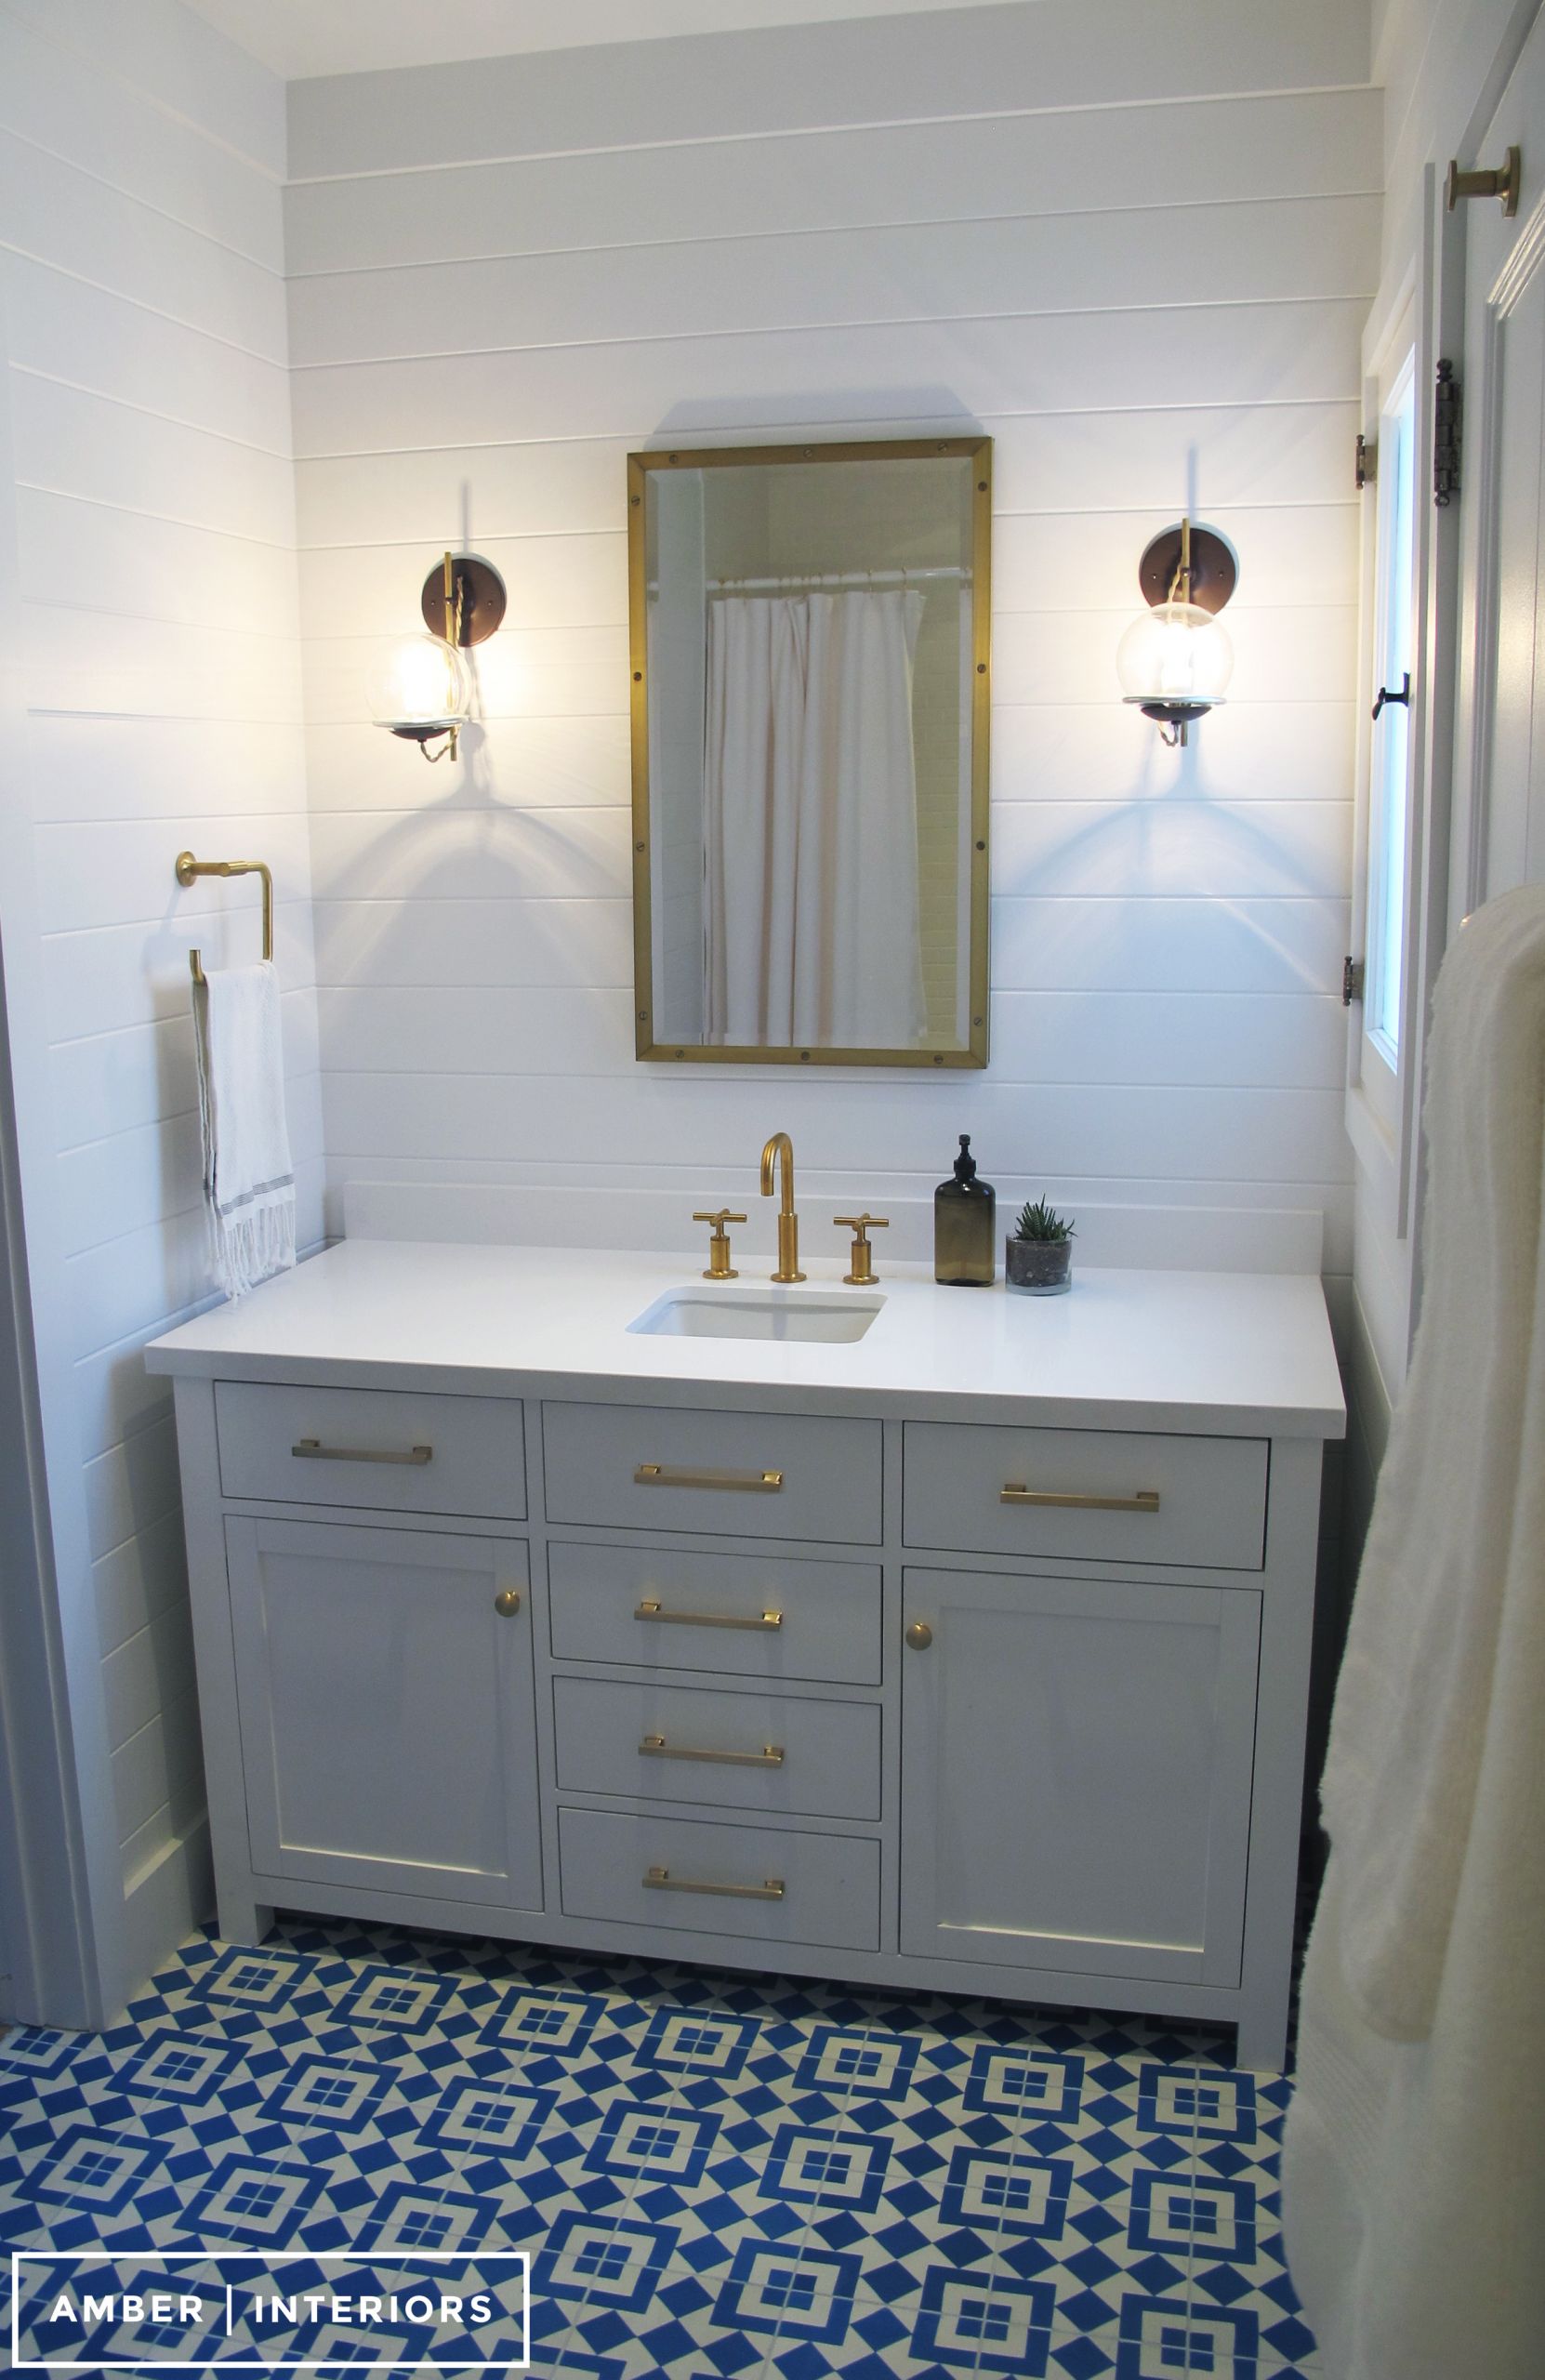 Guest Bathroom Remodeling
 Before & After Guest Bathroom Remodel – Amber Interiors